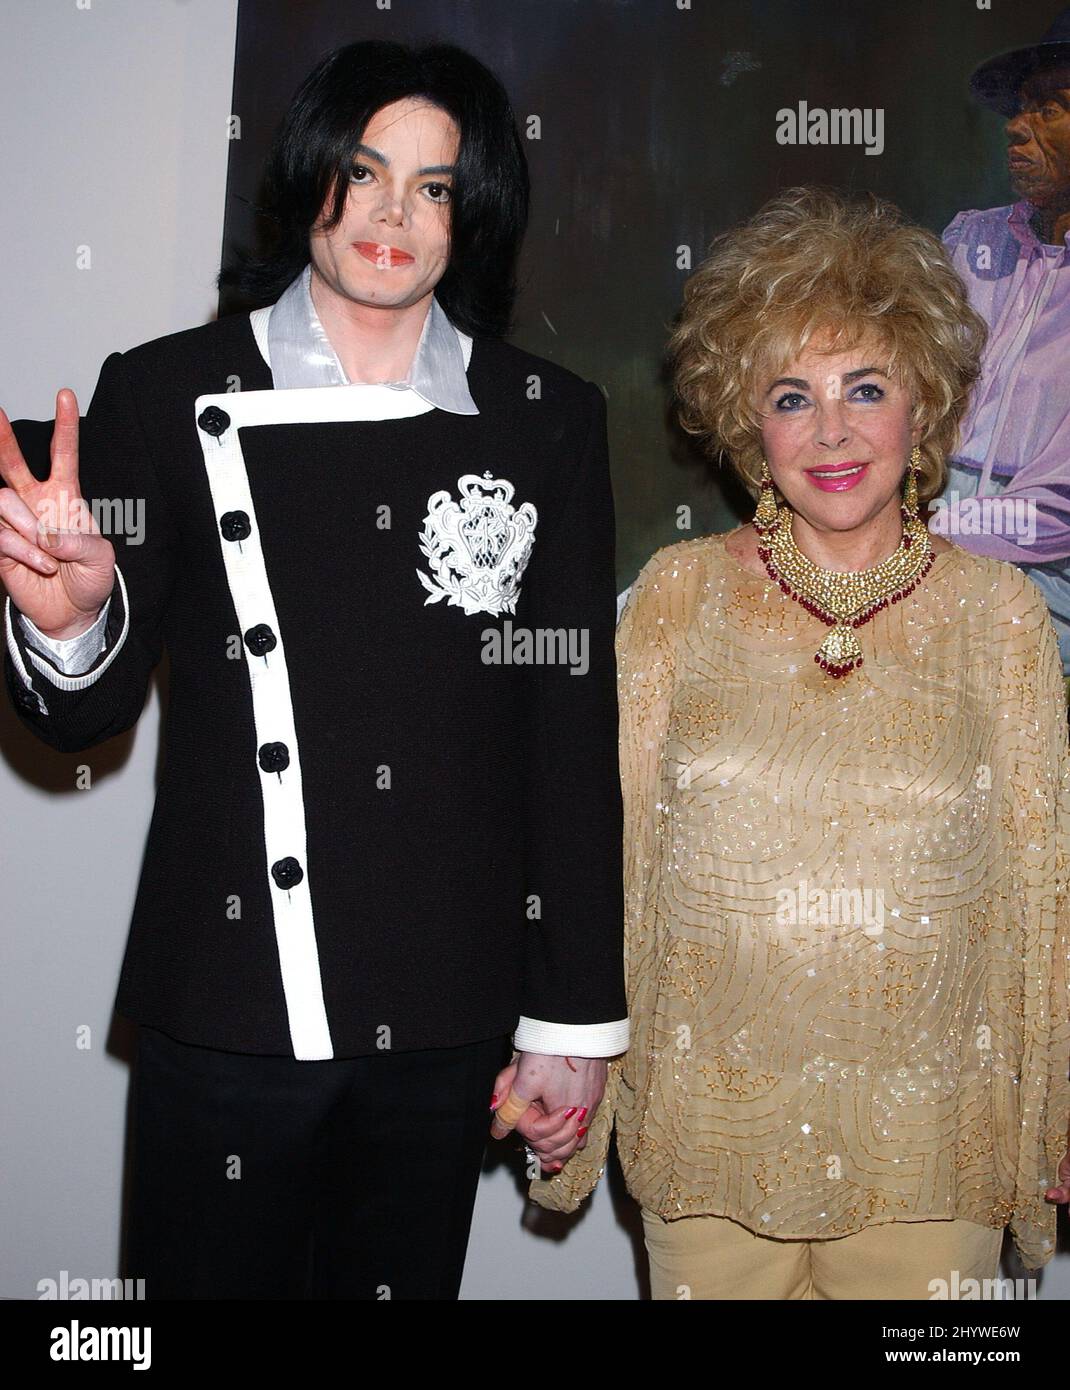 File picture dated February 09, 2002 of singer Michael Jackson and Elizabeth Taylor at the 'Art for AIDS, A Tribute to Rock Hudson' event held at the Laguna Art Museum. Stock Photo